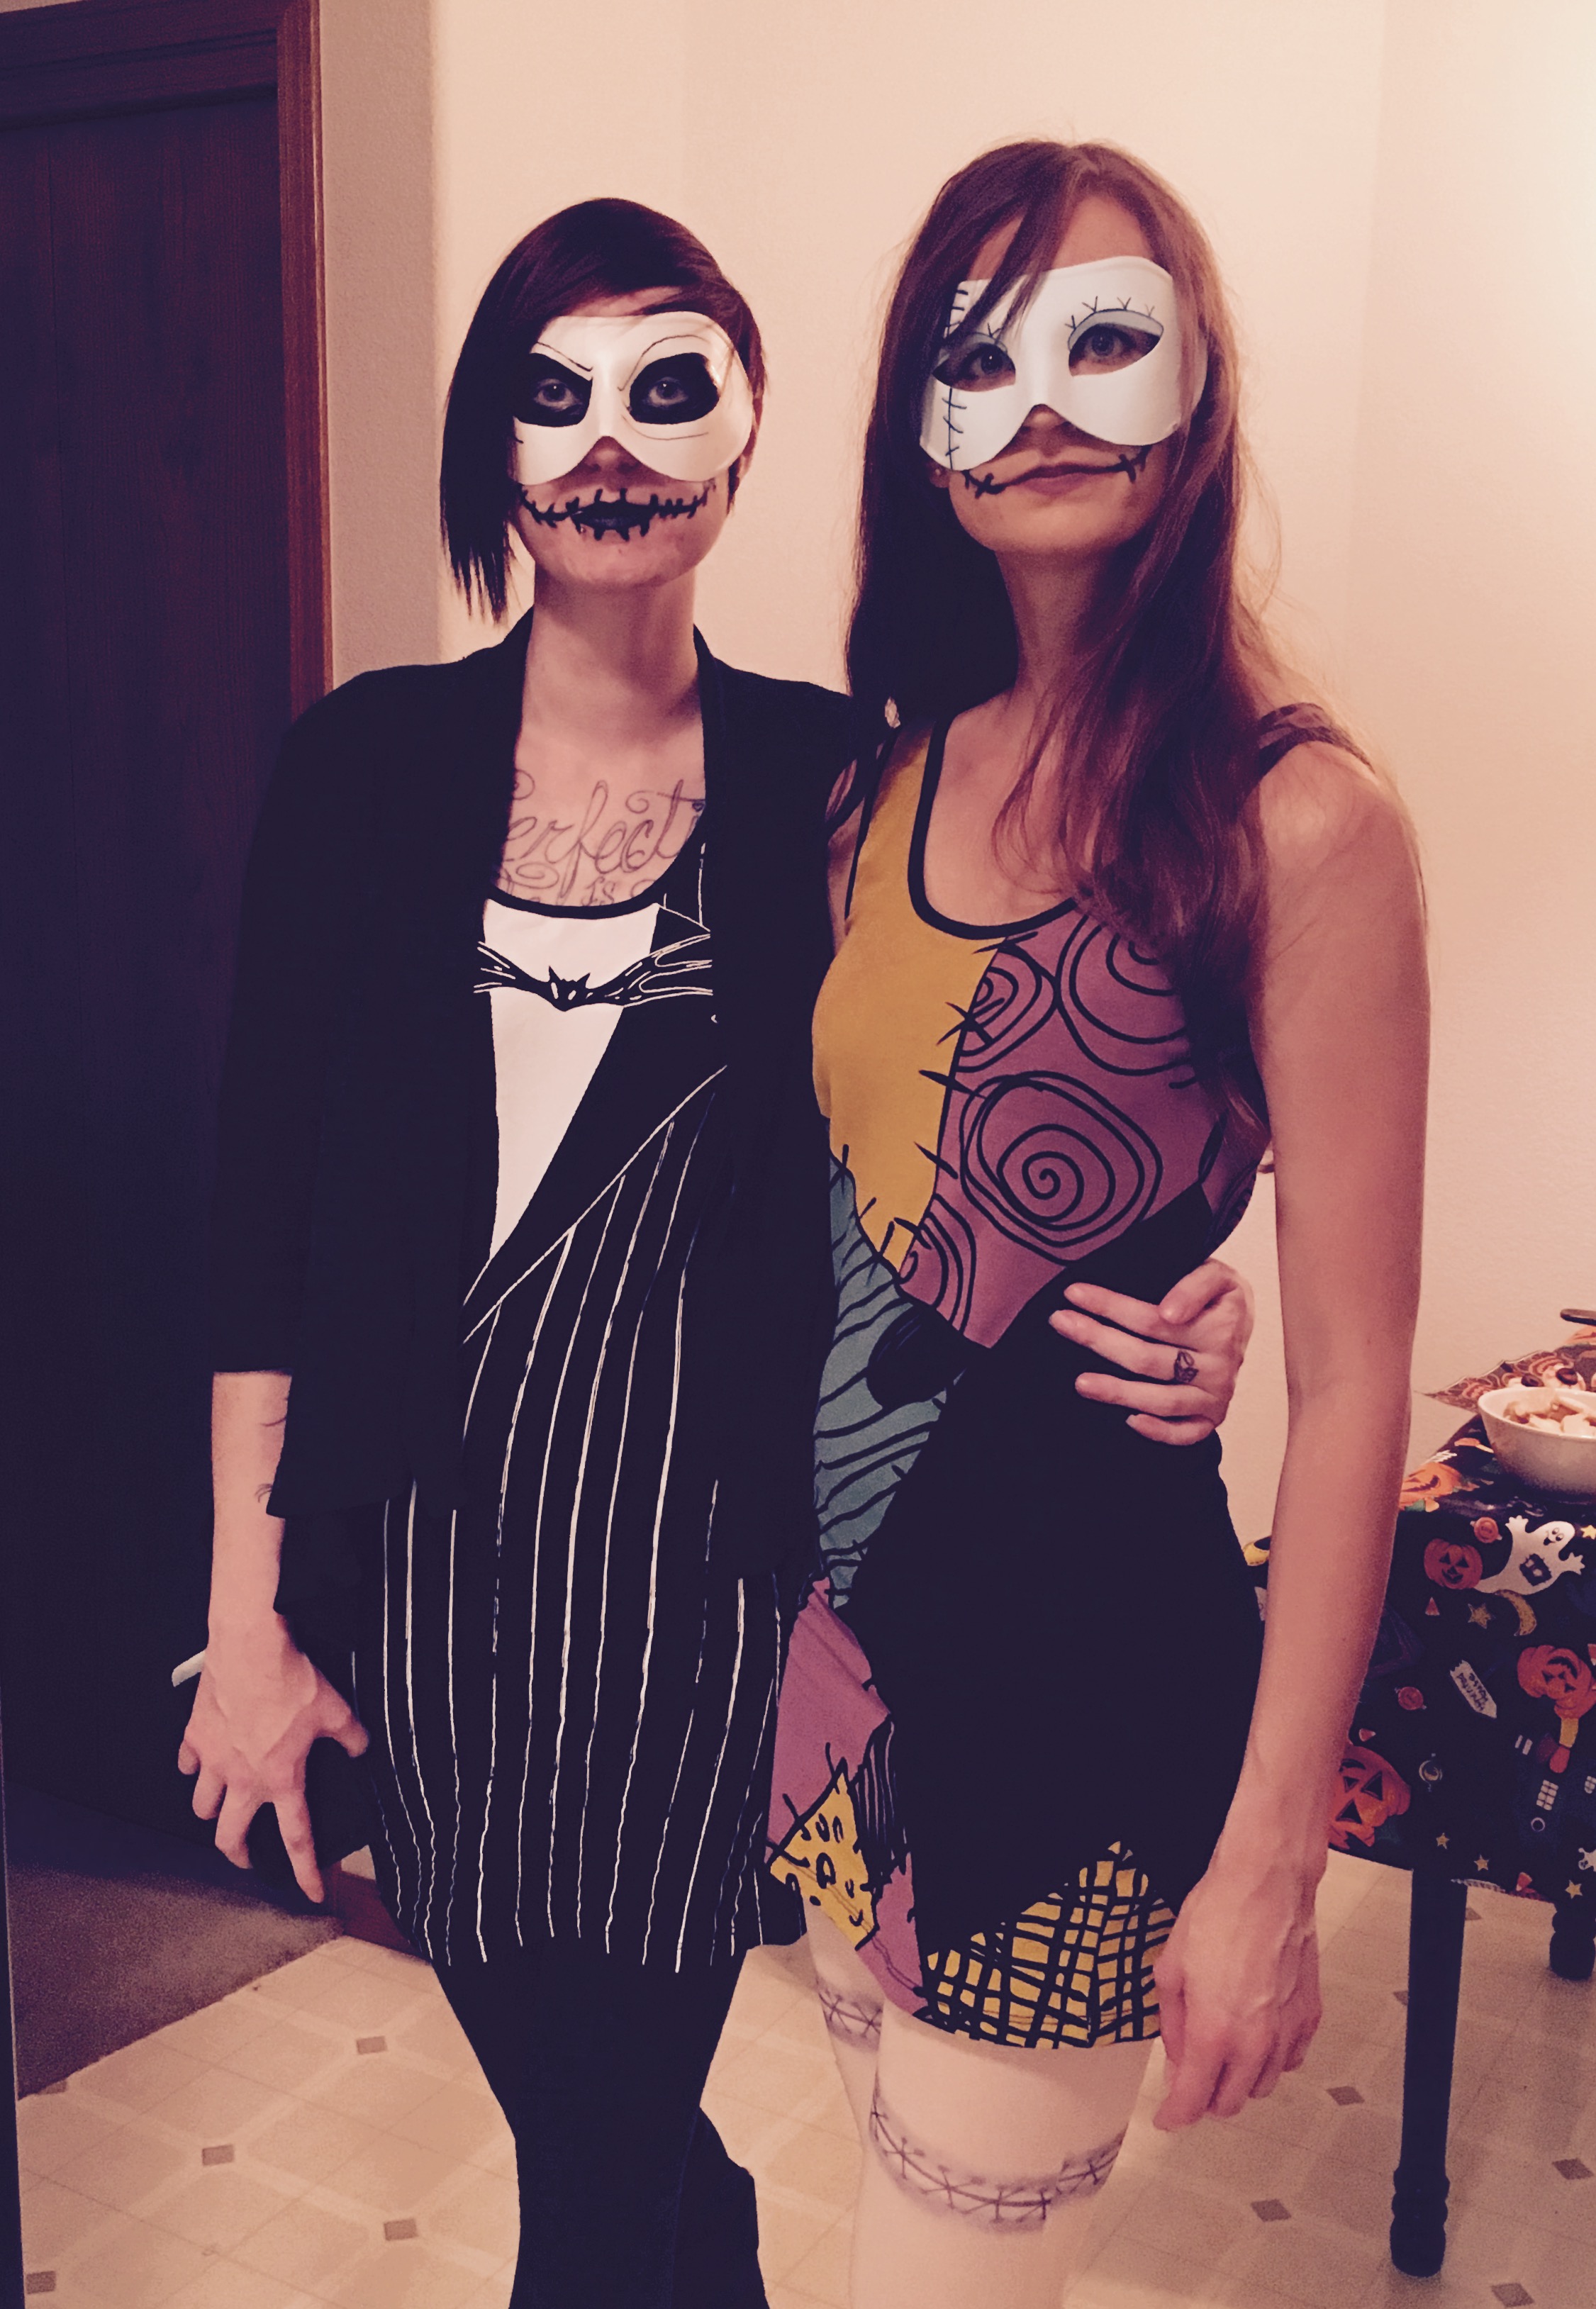 Leanna and me as Jack and Sally from The Nightmare Before Christmas